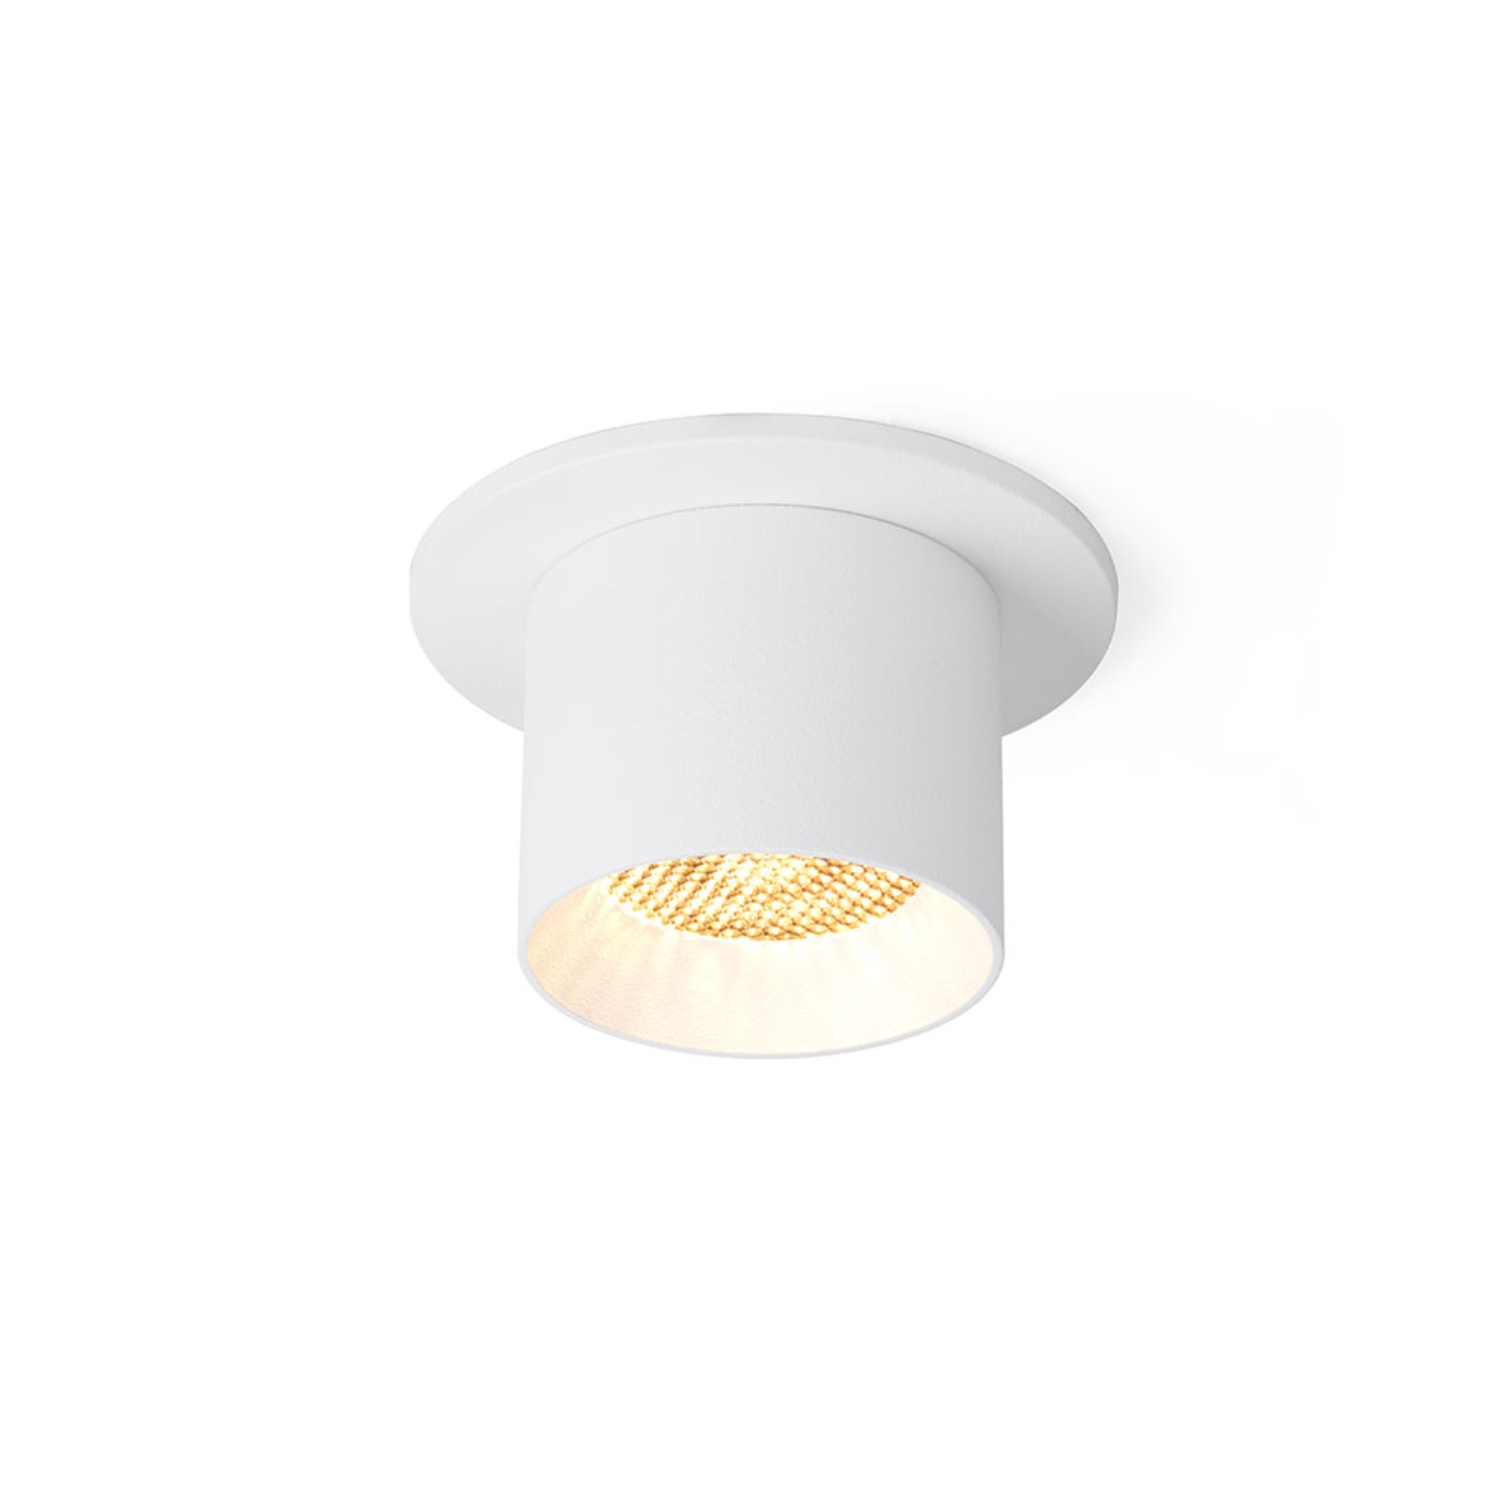 AUDY-IN - Ceiling Light